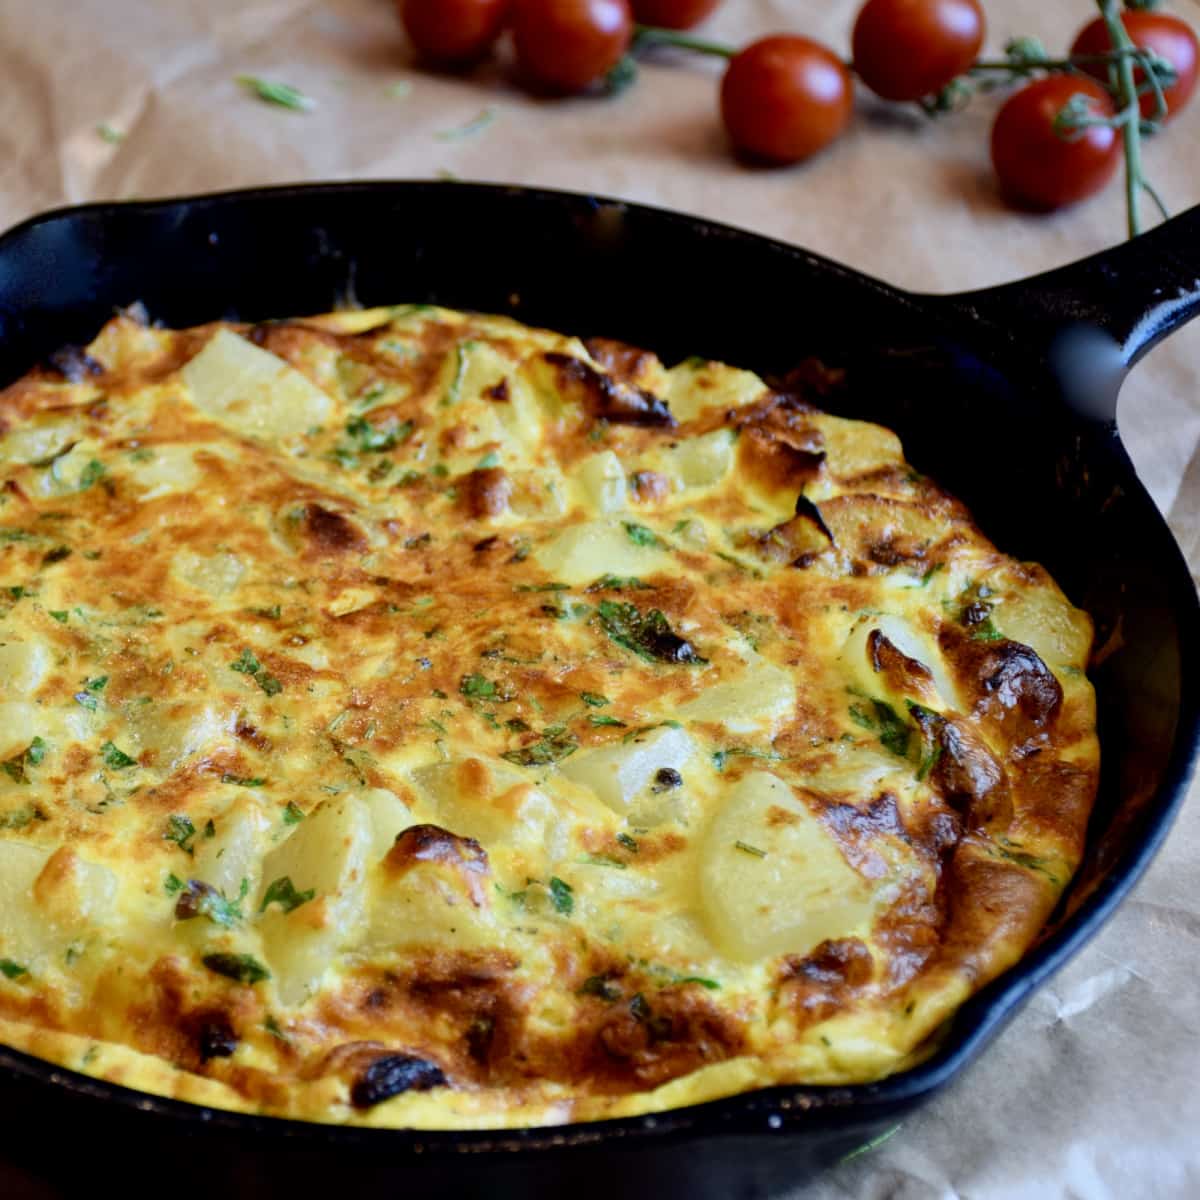 A cast iron pan holds a nicely browned Spanish Tortilla.